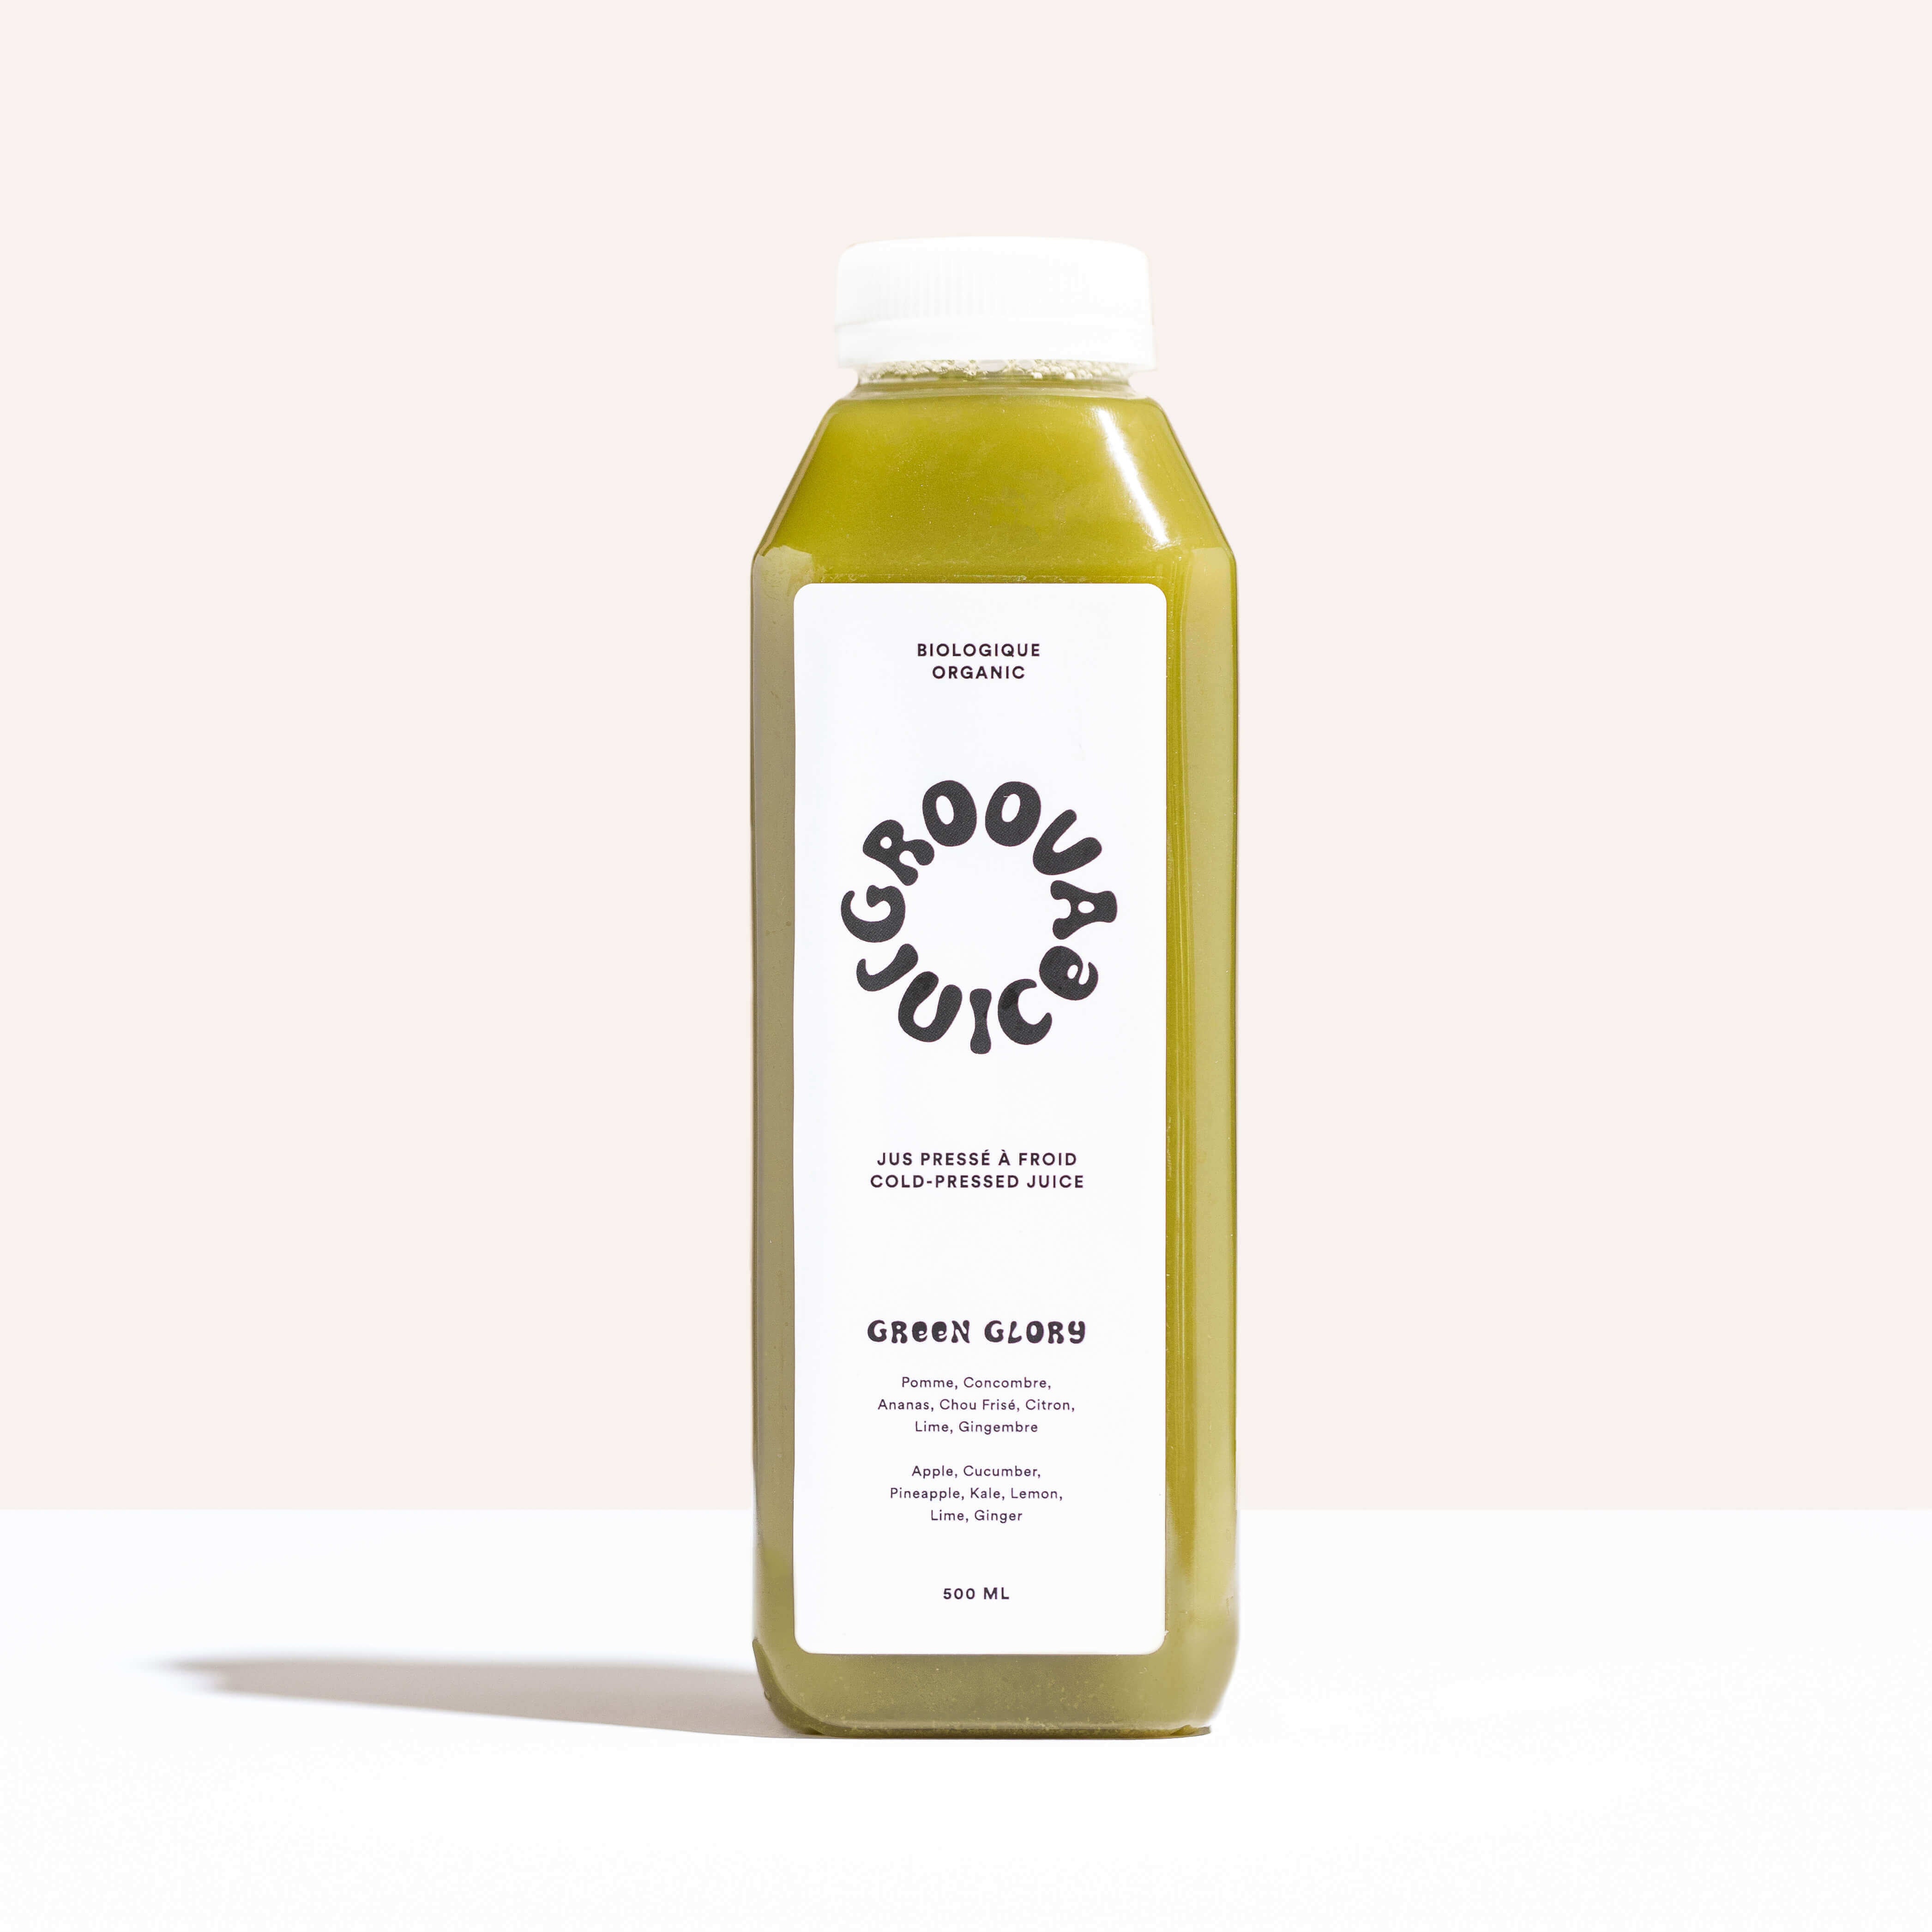 Green Glory Cold-Pressed Juice